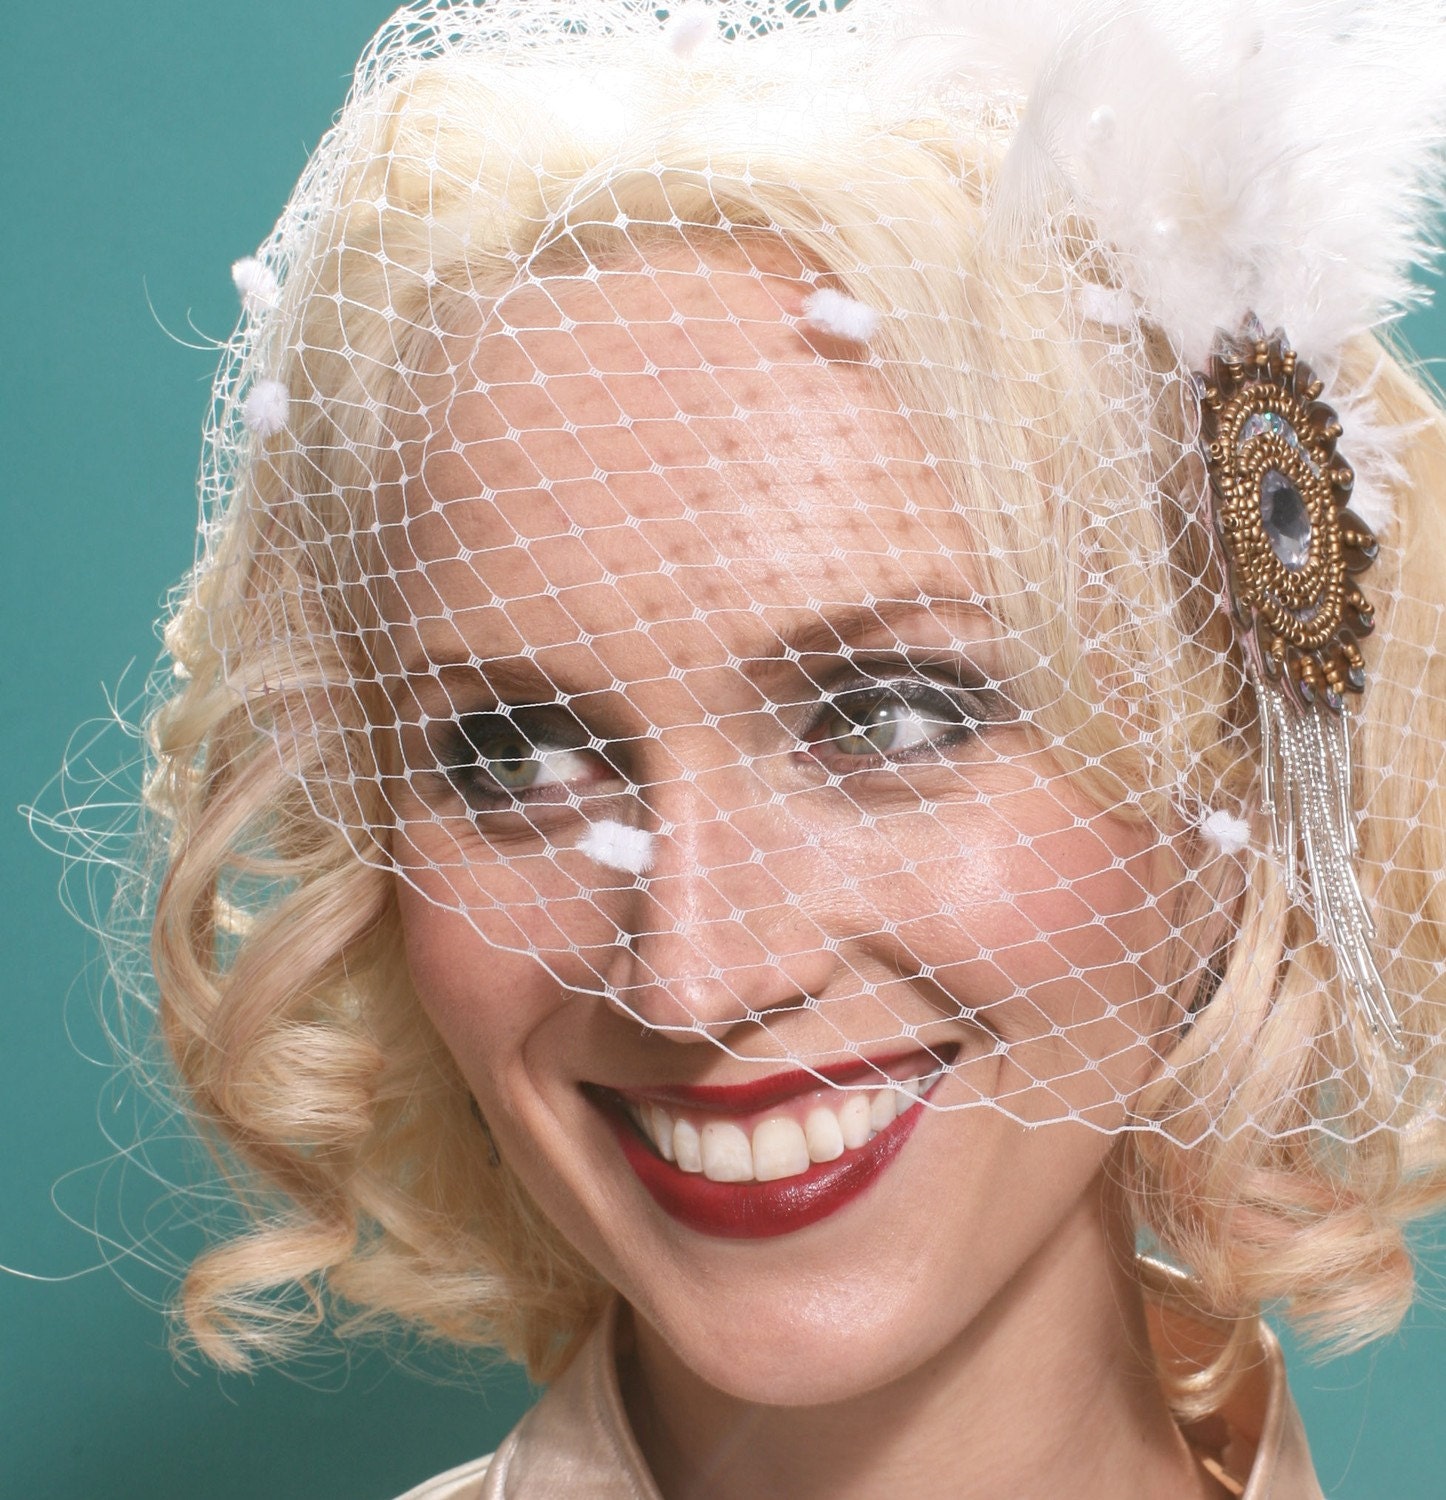 Let It Snow Birdcage Veil w/ Chenille Dots - Winter Bride Blusher- By Moonshine Baby